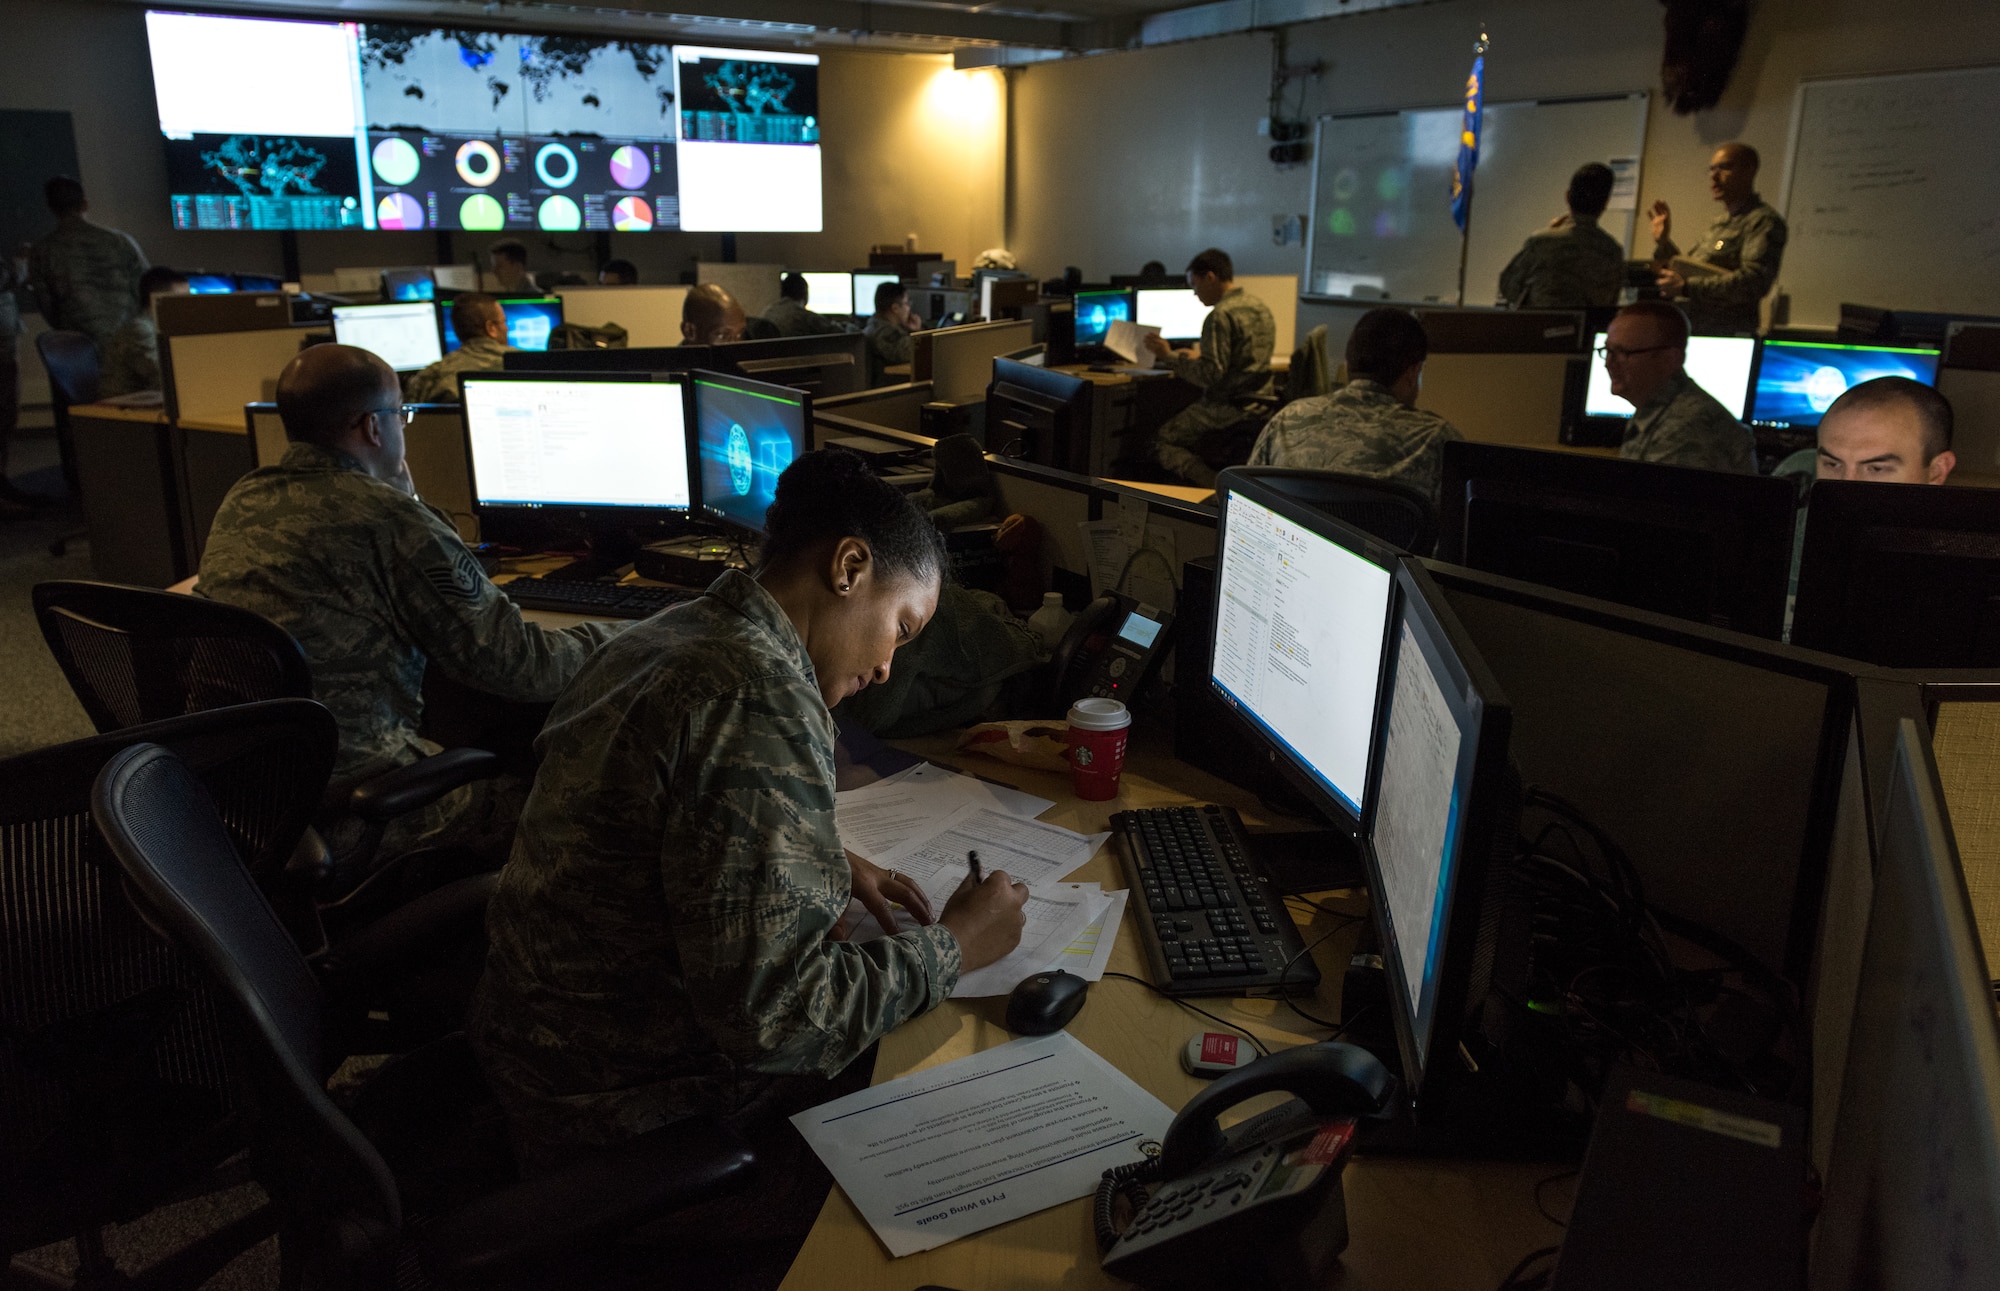 Cyber warfare operators serving with the 175th Cyberspace Operations Group of the Maryland Air National Guard at Warfield Air National Guard Base, Middle River, Md., monitor cyber attacks on the operations floor of the 275th Cyber Operations Squadron, known as the Hunter's Den, Dec. 2, 2017. (U.S. Air Force photo by J.M. Eddins Jr.)